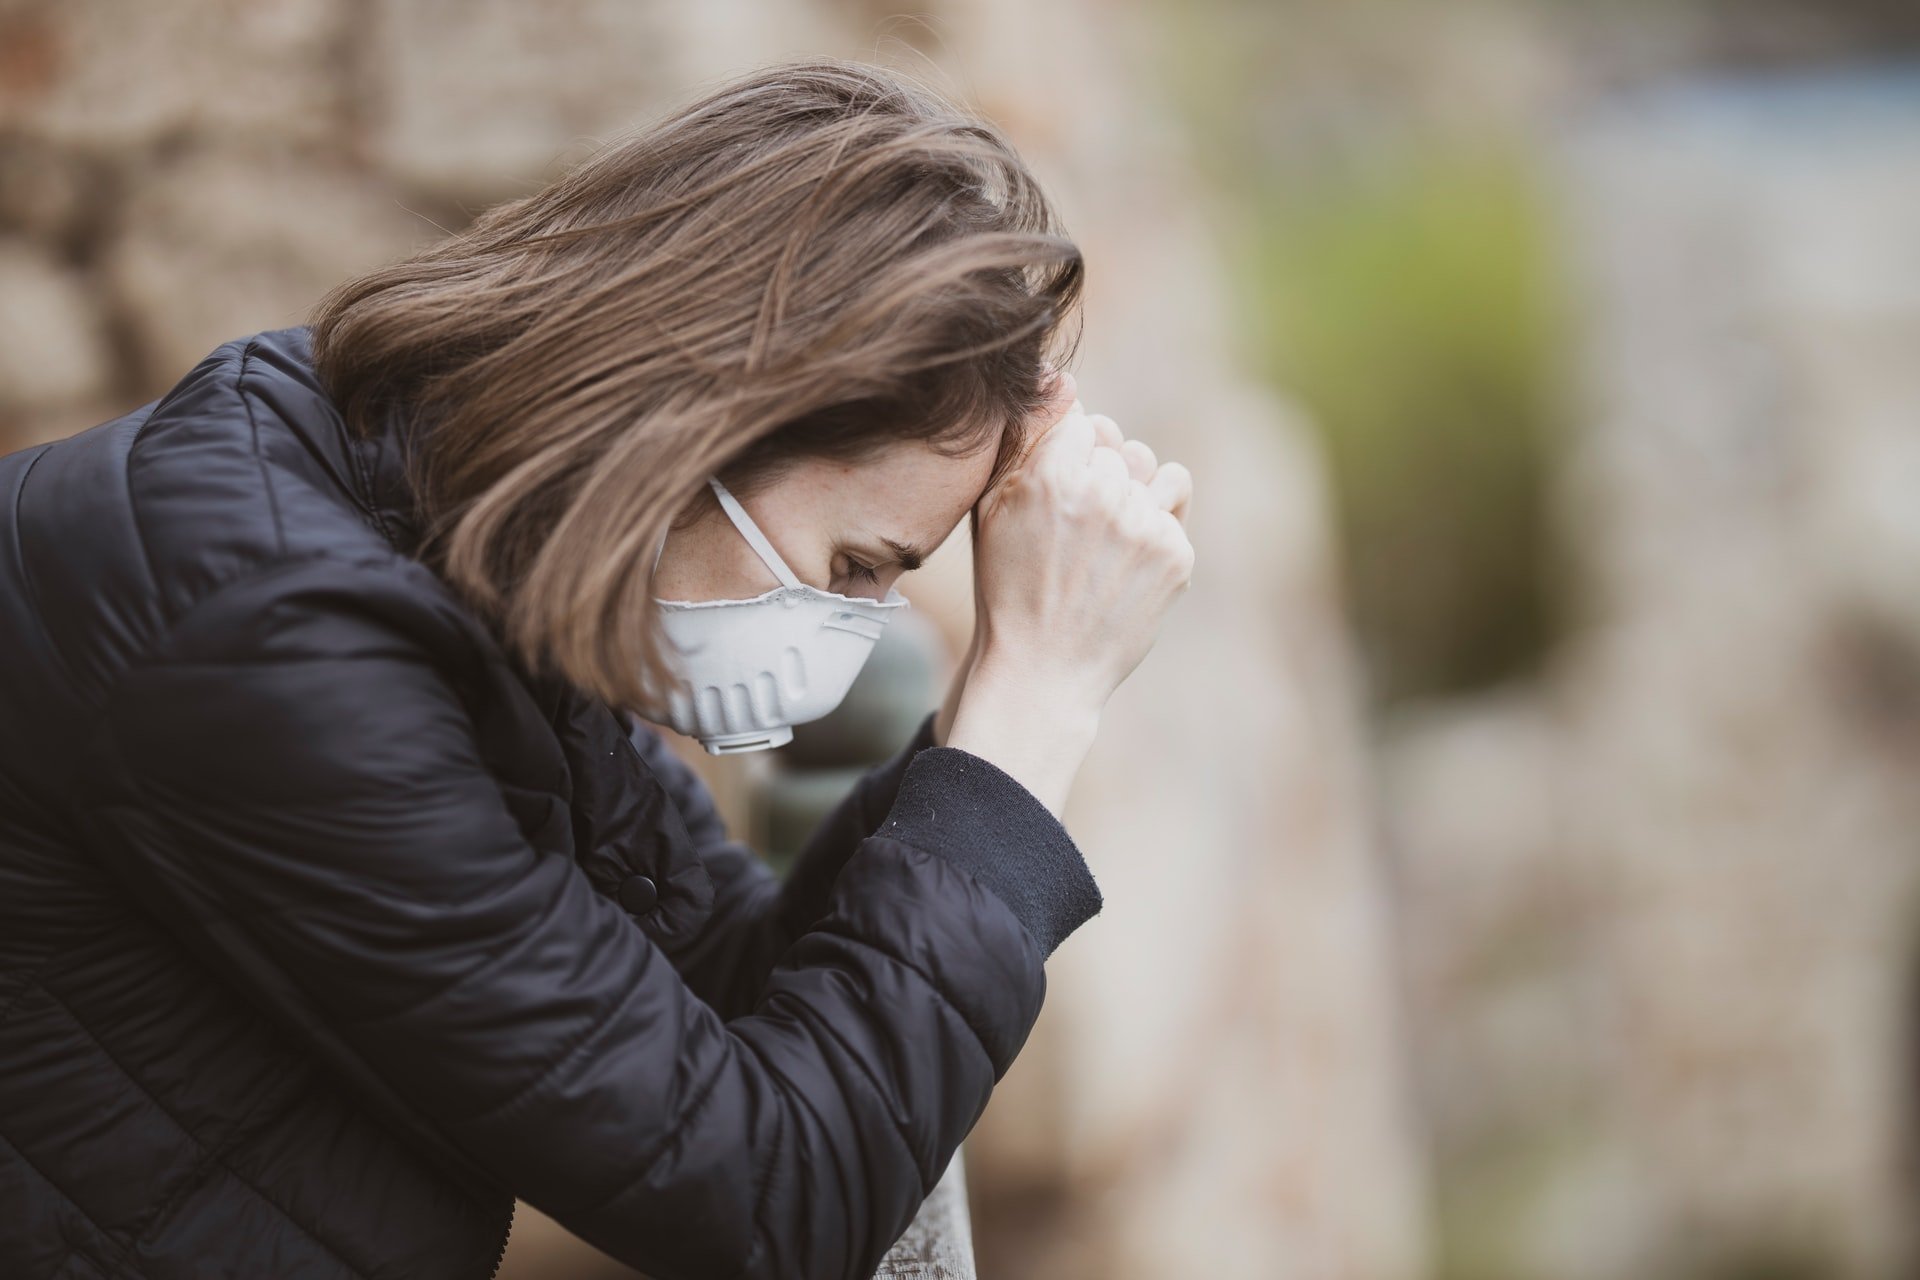 COVID-19 Caused 25% Increase in Anxiety and Depression, Says WHO